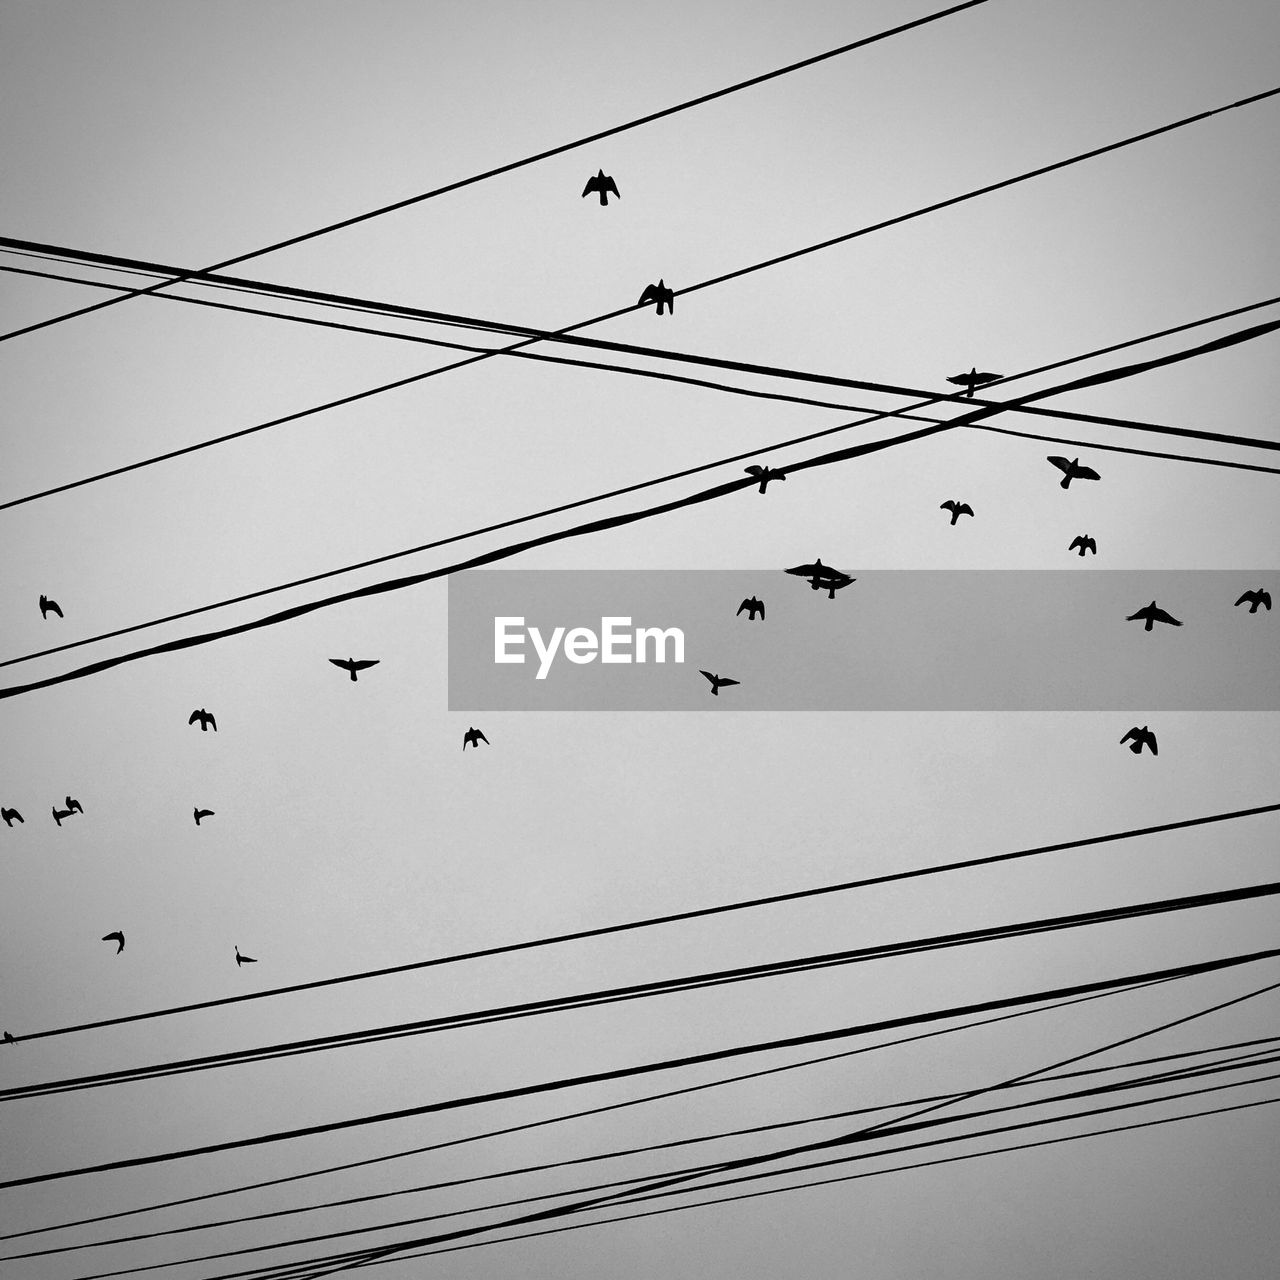 Low angle view of birds flying in sky seen through power lines